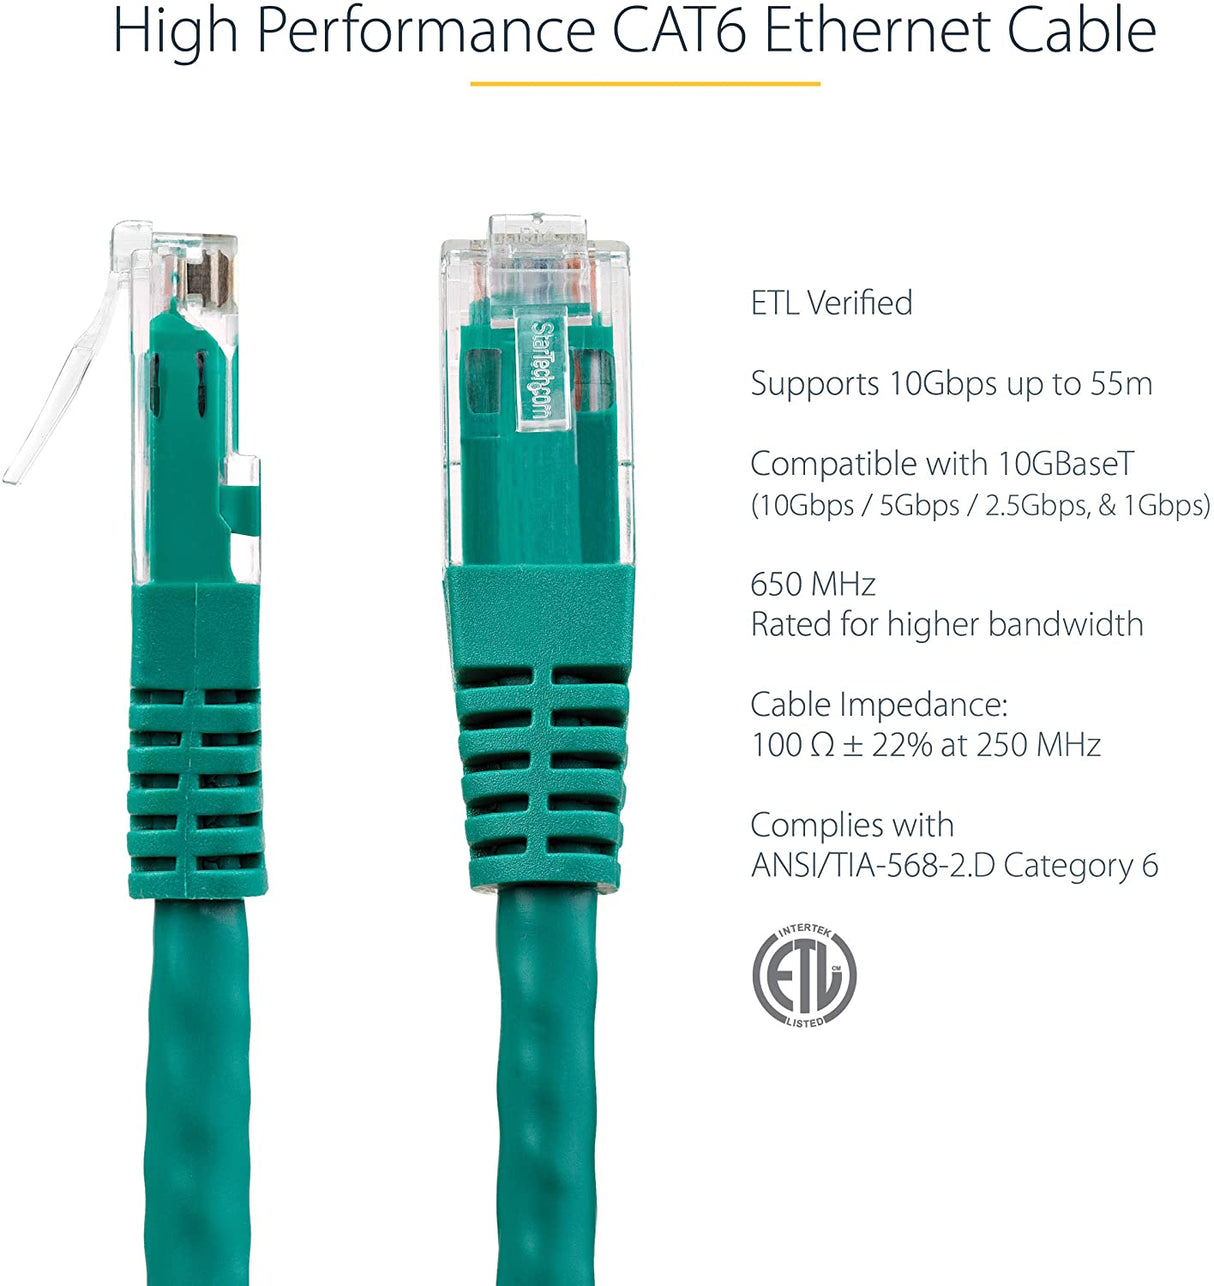 StarTech.com 10ft CAT6 Ethernet Cable - Green CAT 6 Gigabit Ethernet Wire -650MHz 100W PoE++ RJ45 UTP Molded Category 6 Network/Patch Cord w/Strain Relief/Fluke Tested UL/TIA Certified (C6PATCH10GN) Green 10 ft / 3m 1 Pack